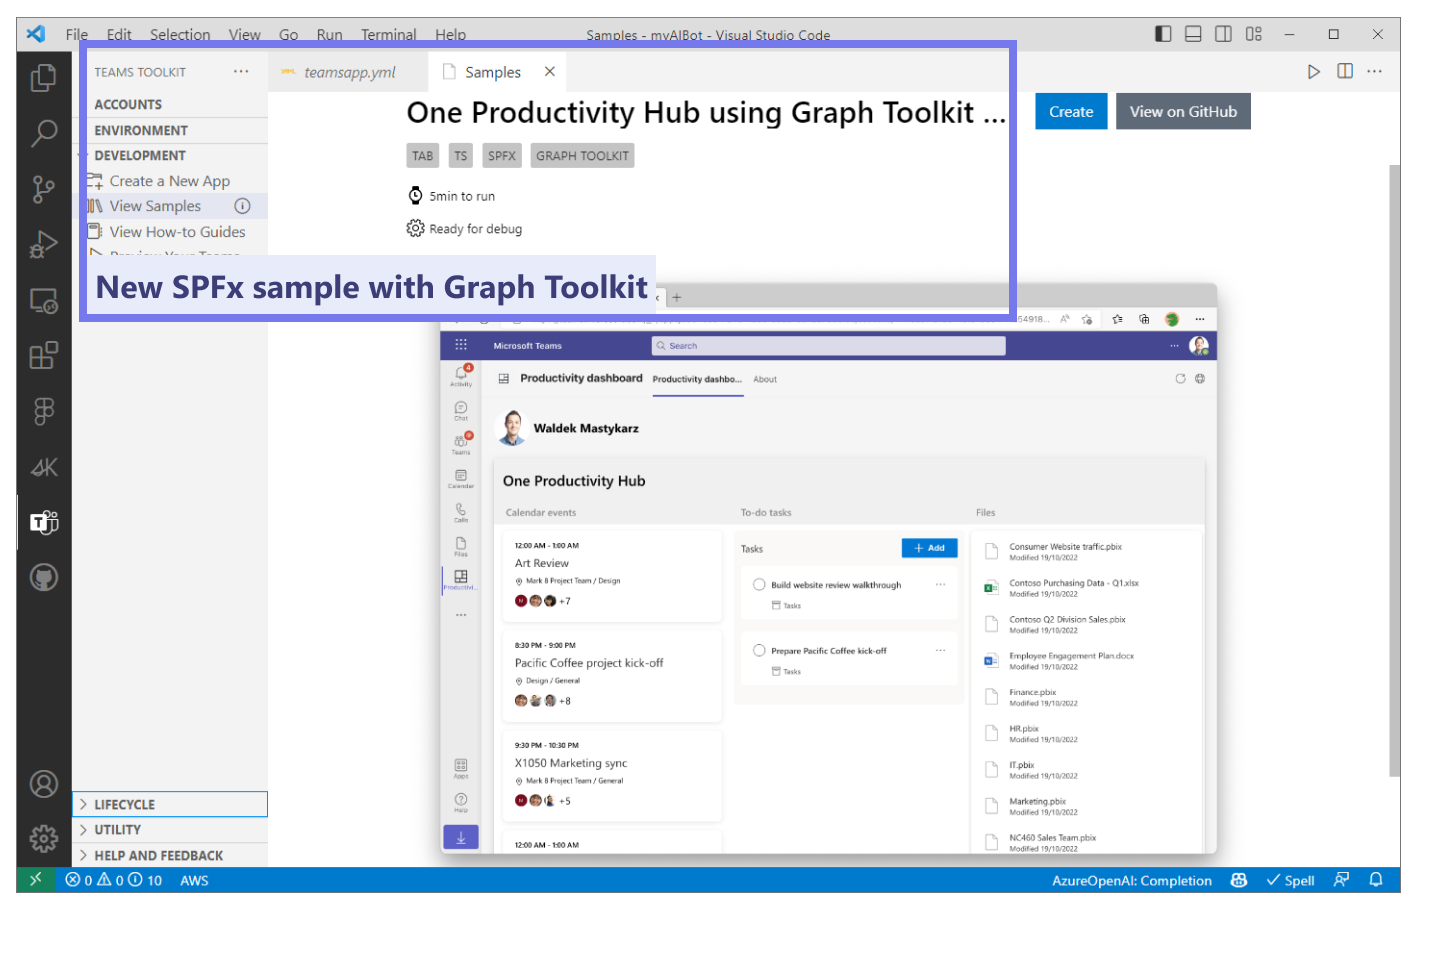 Teams Toolkit for Visual Studio code window using the New SPFX sample with Graph Toolkit - One Productivity Hub